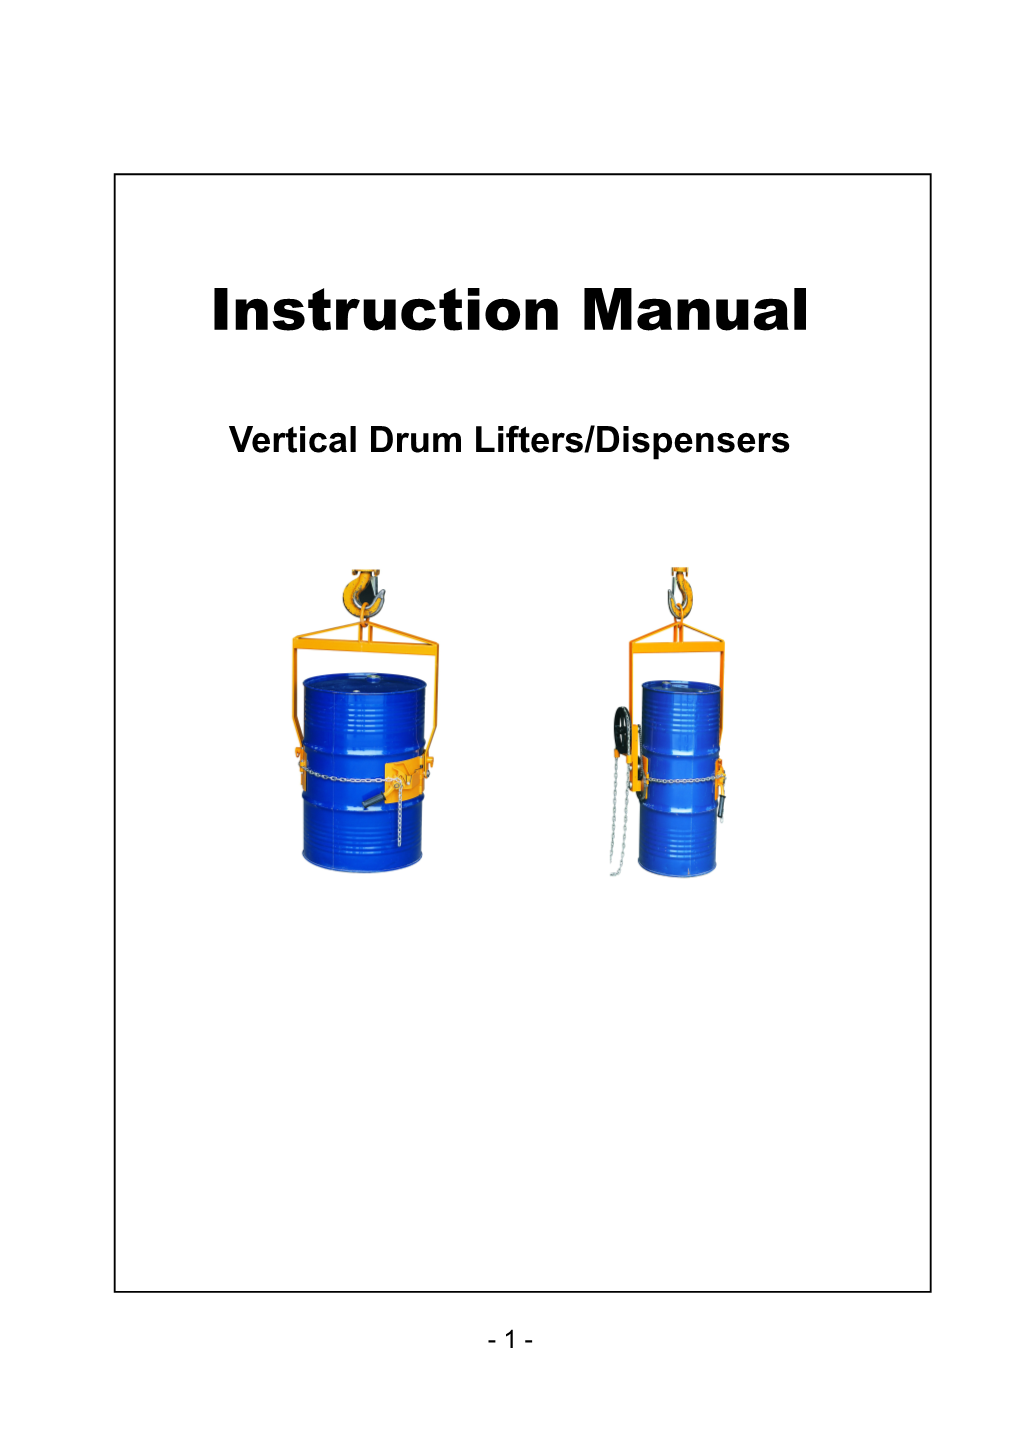 Thank You for Using This Drum Lifters